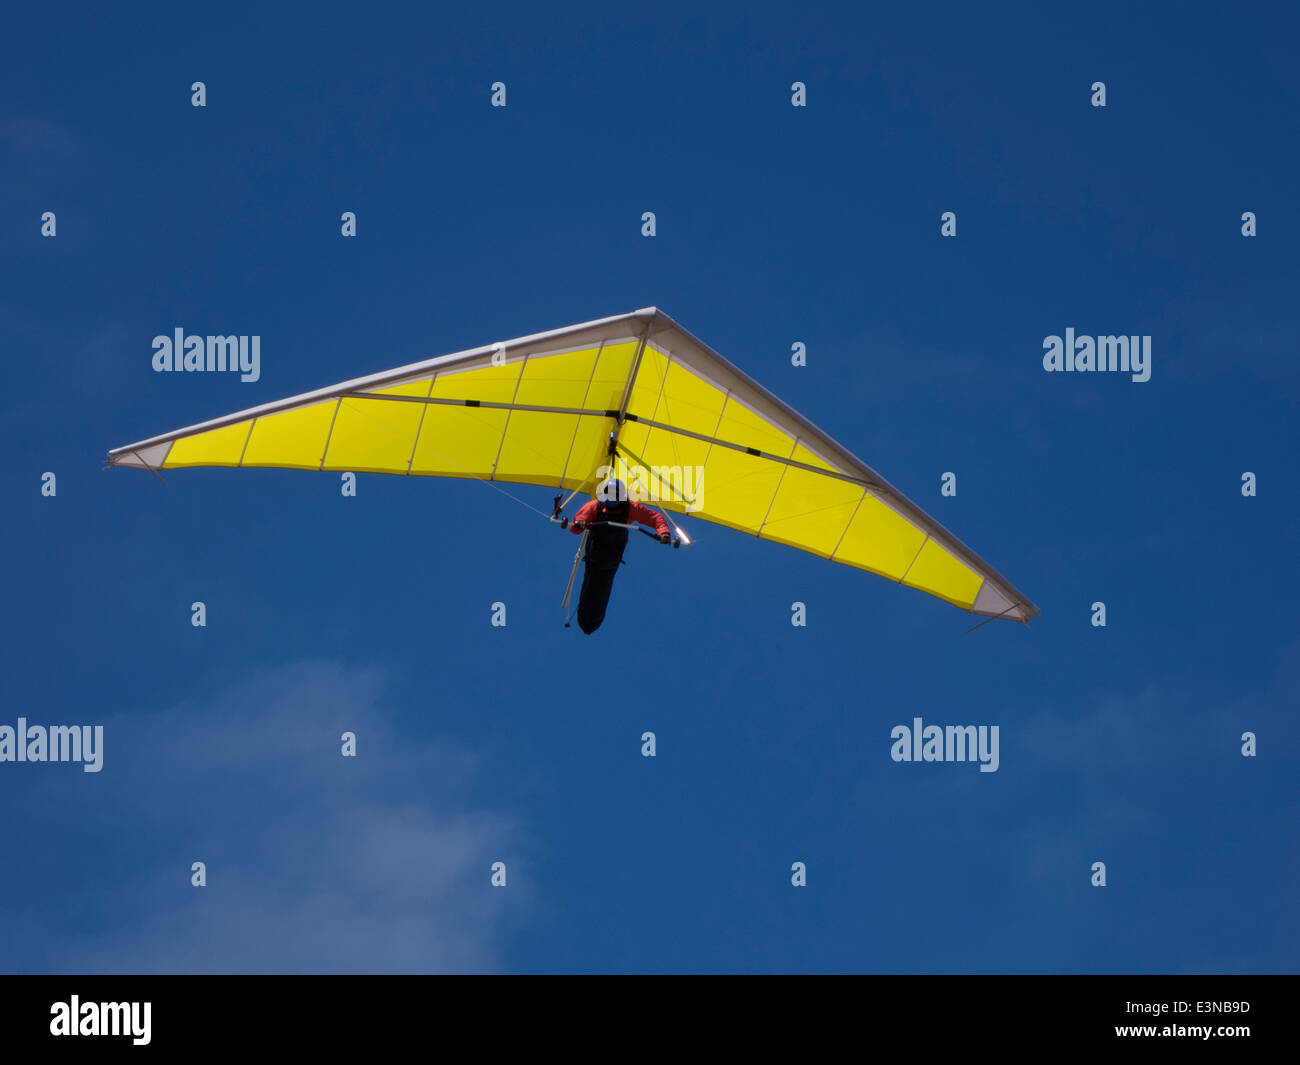 Low angle view of a person hang-gliding against sky Stock Photo